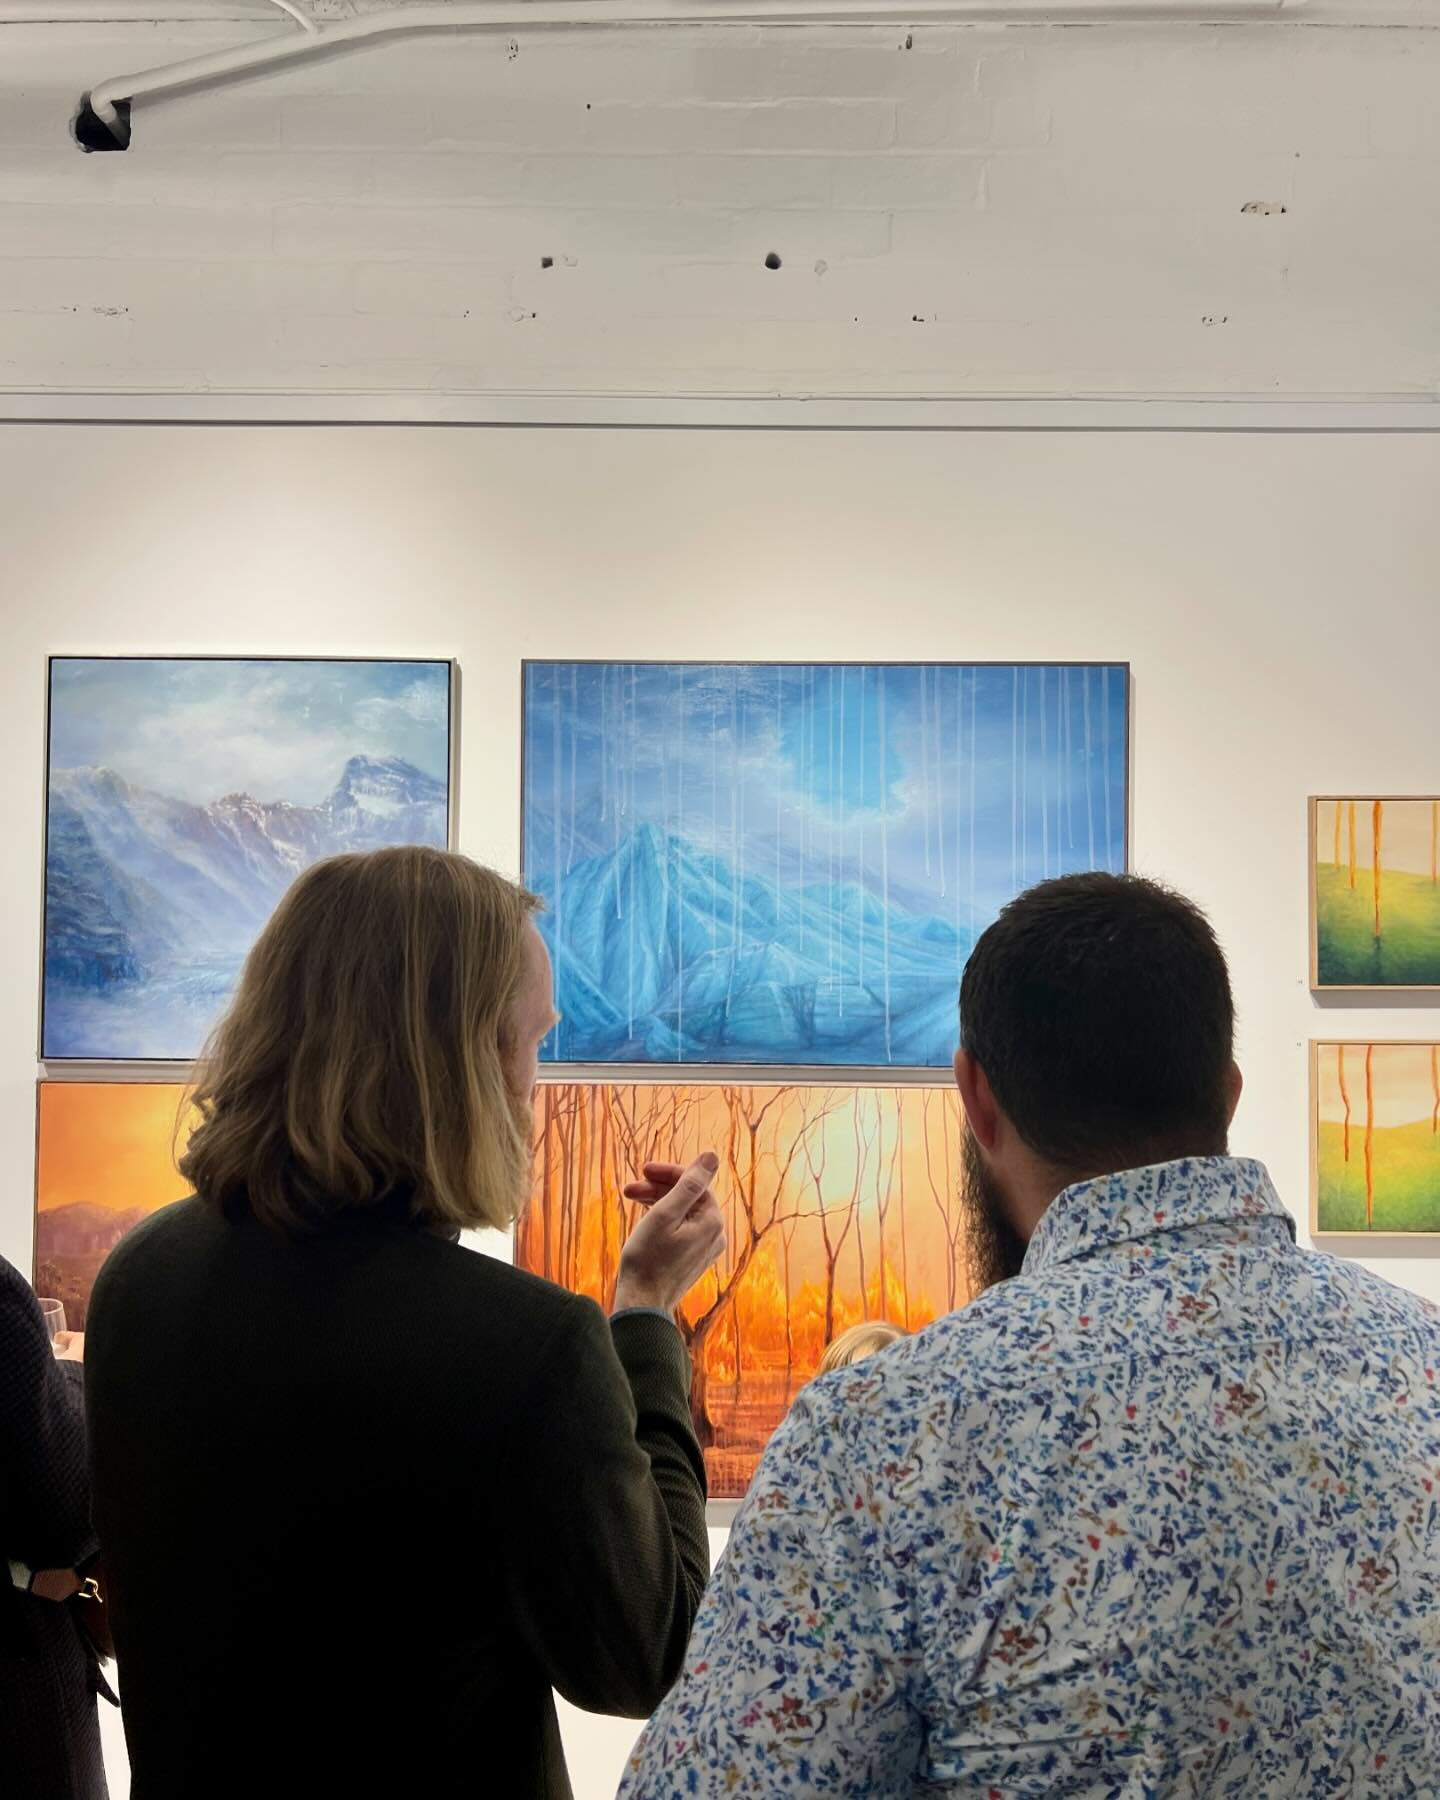 Anatomy of the Angophora Opening
A fabulous night had by all!
Tim you are very admired and loved by all those around you, students, teachers and fans. 
Here&rsquo;s a few party shots for you.
.
Open today until 2pm
Come and see this stunning show!
.
